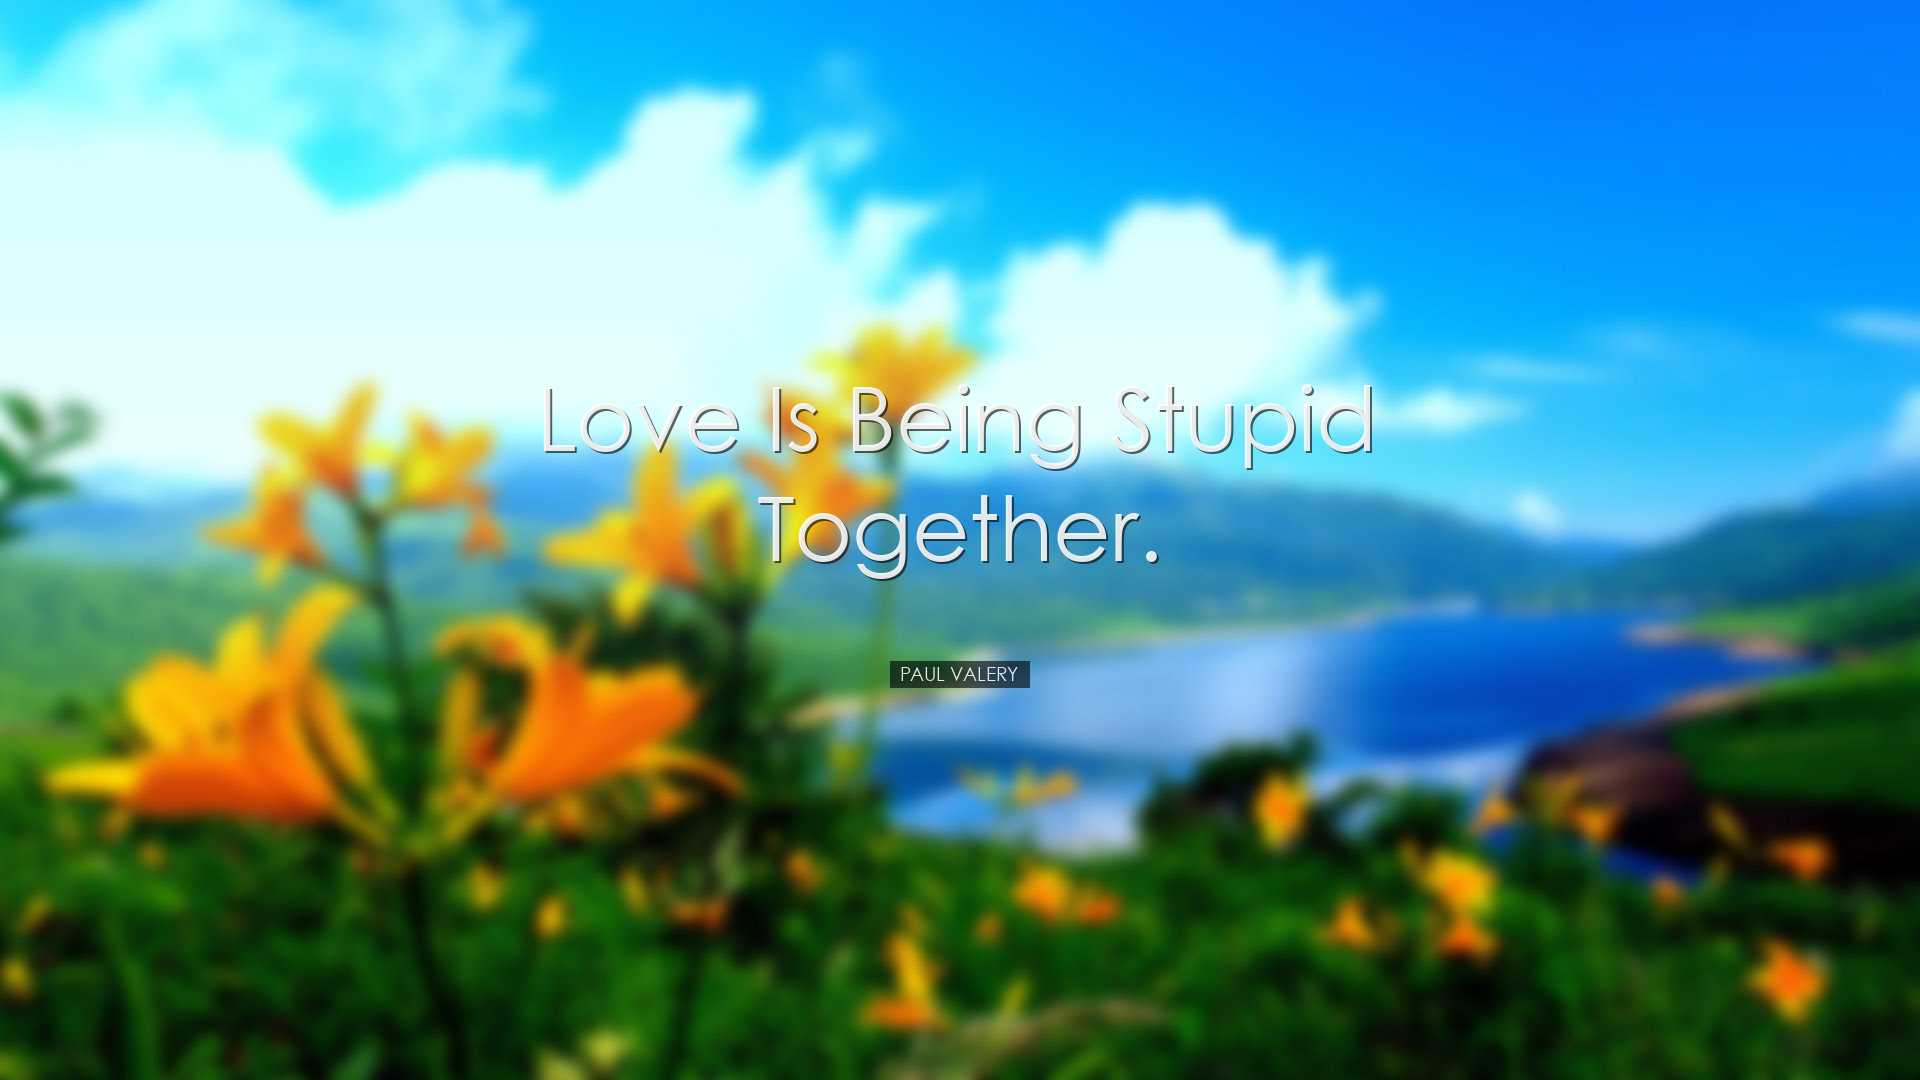 Love is being stupid together. - Paul Valery